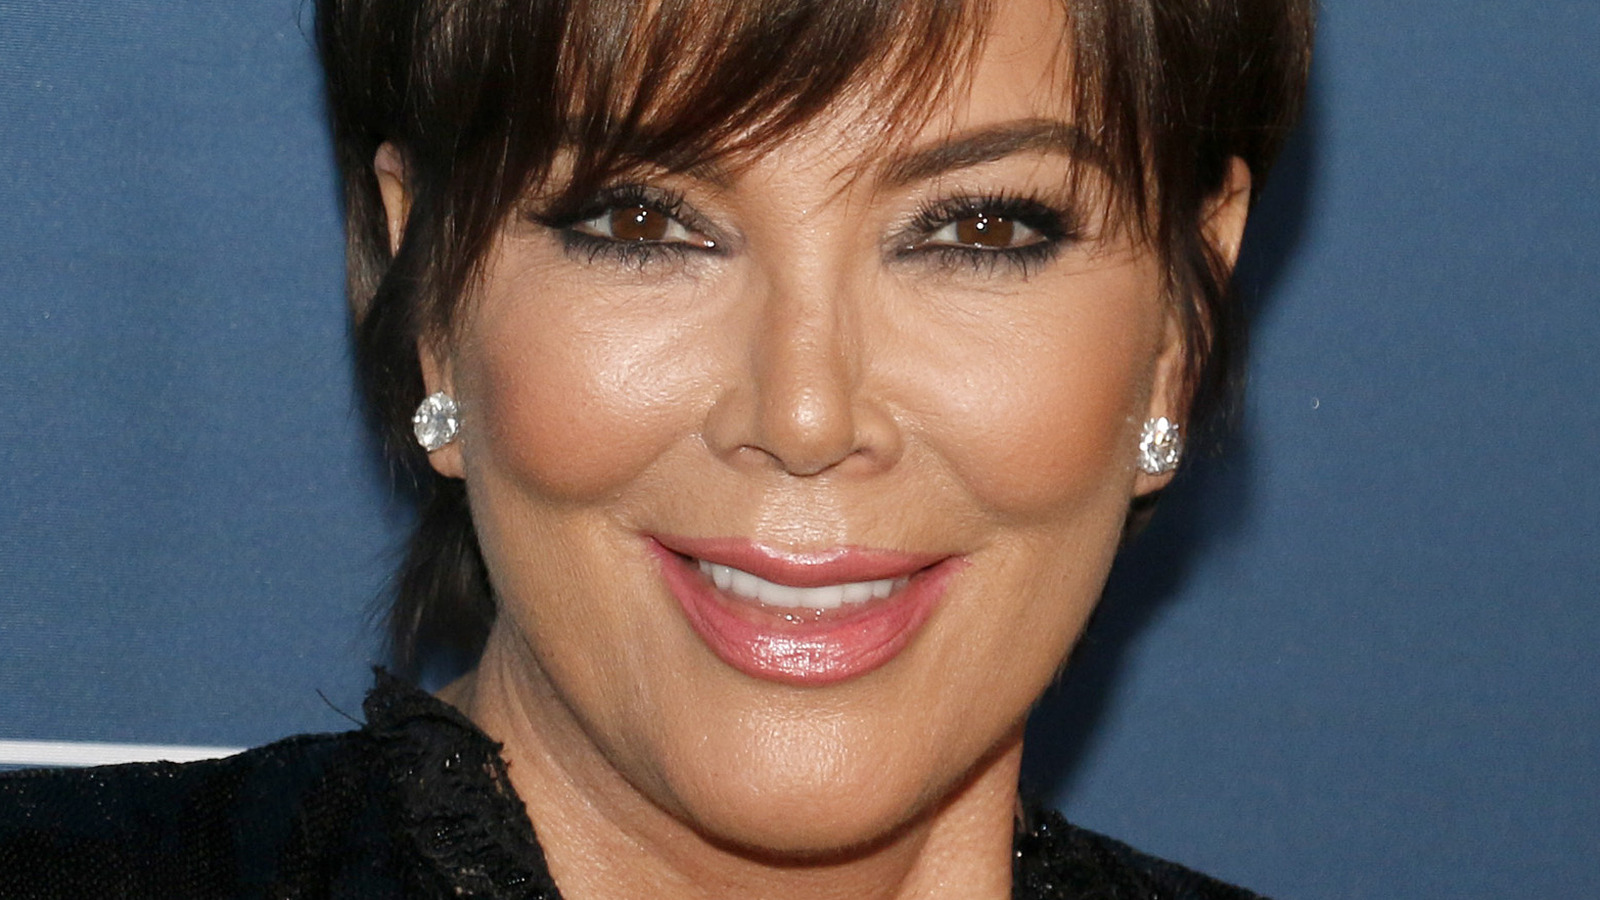 https://www.mashed.com/img/gallery/the-crucial-martini-ingredient-kris-jenner-never-uses/l-intro-1664202397.jpg